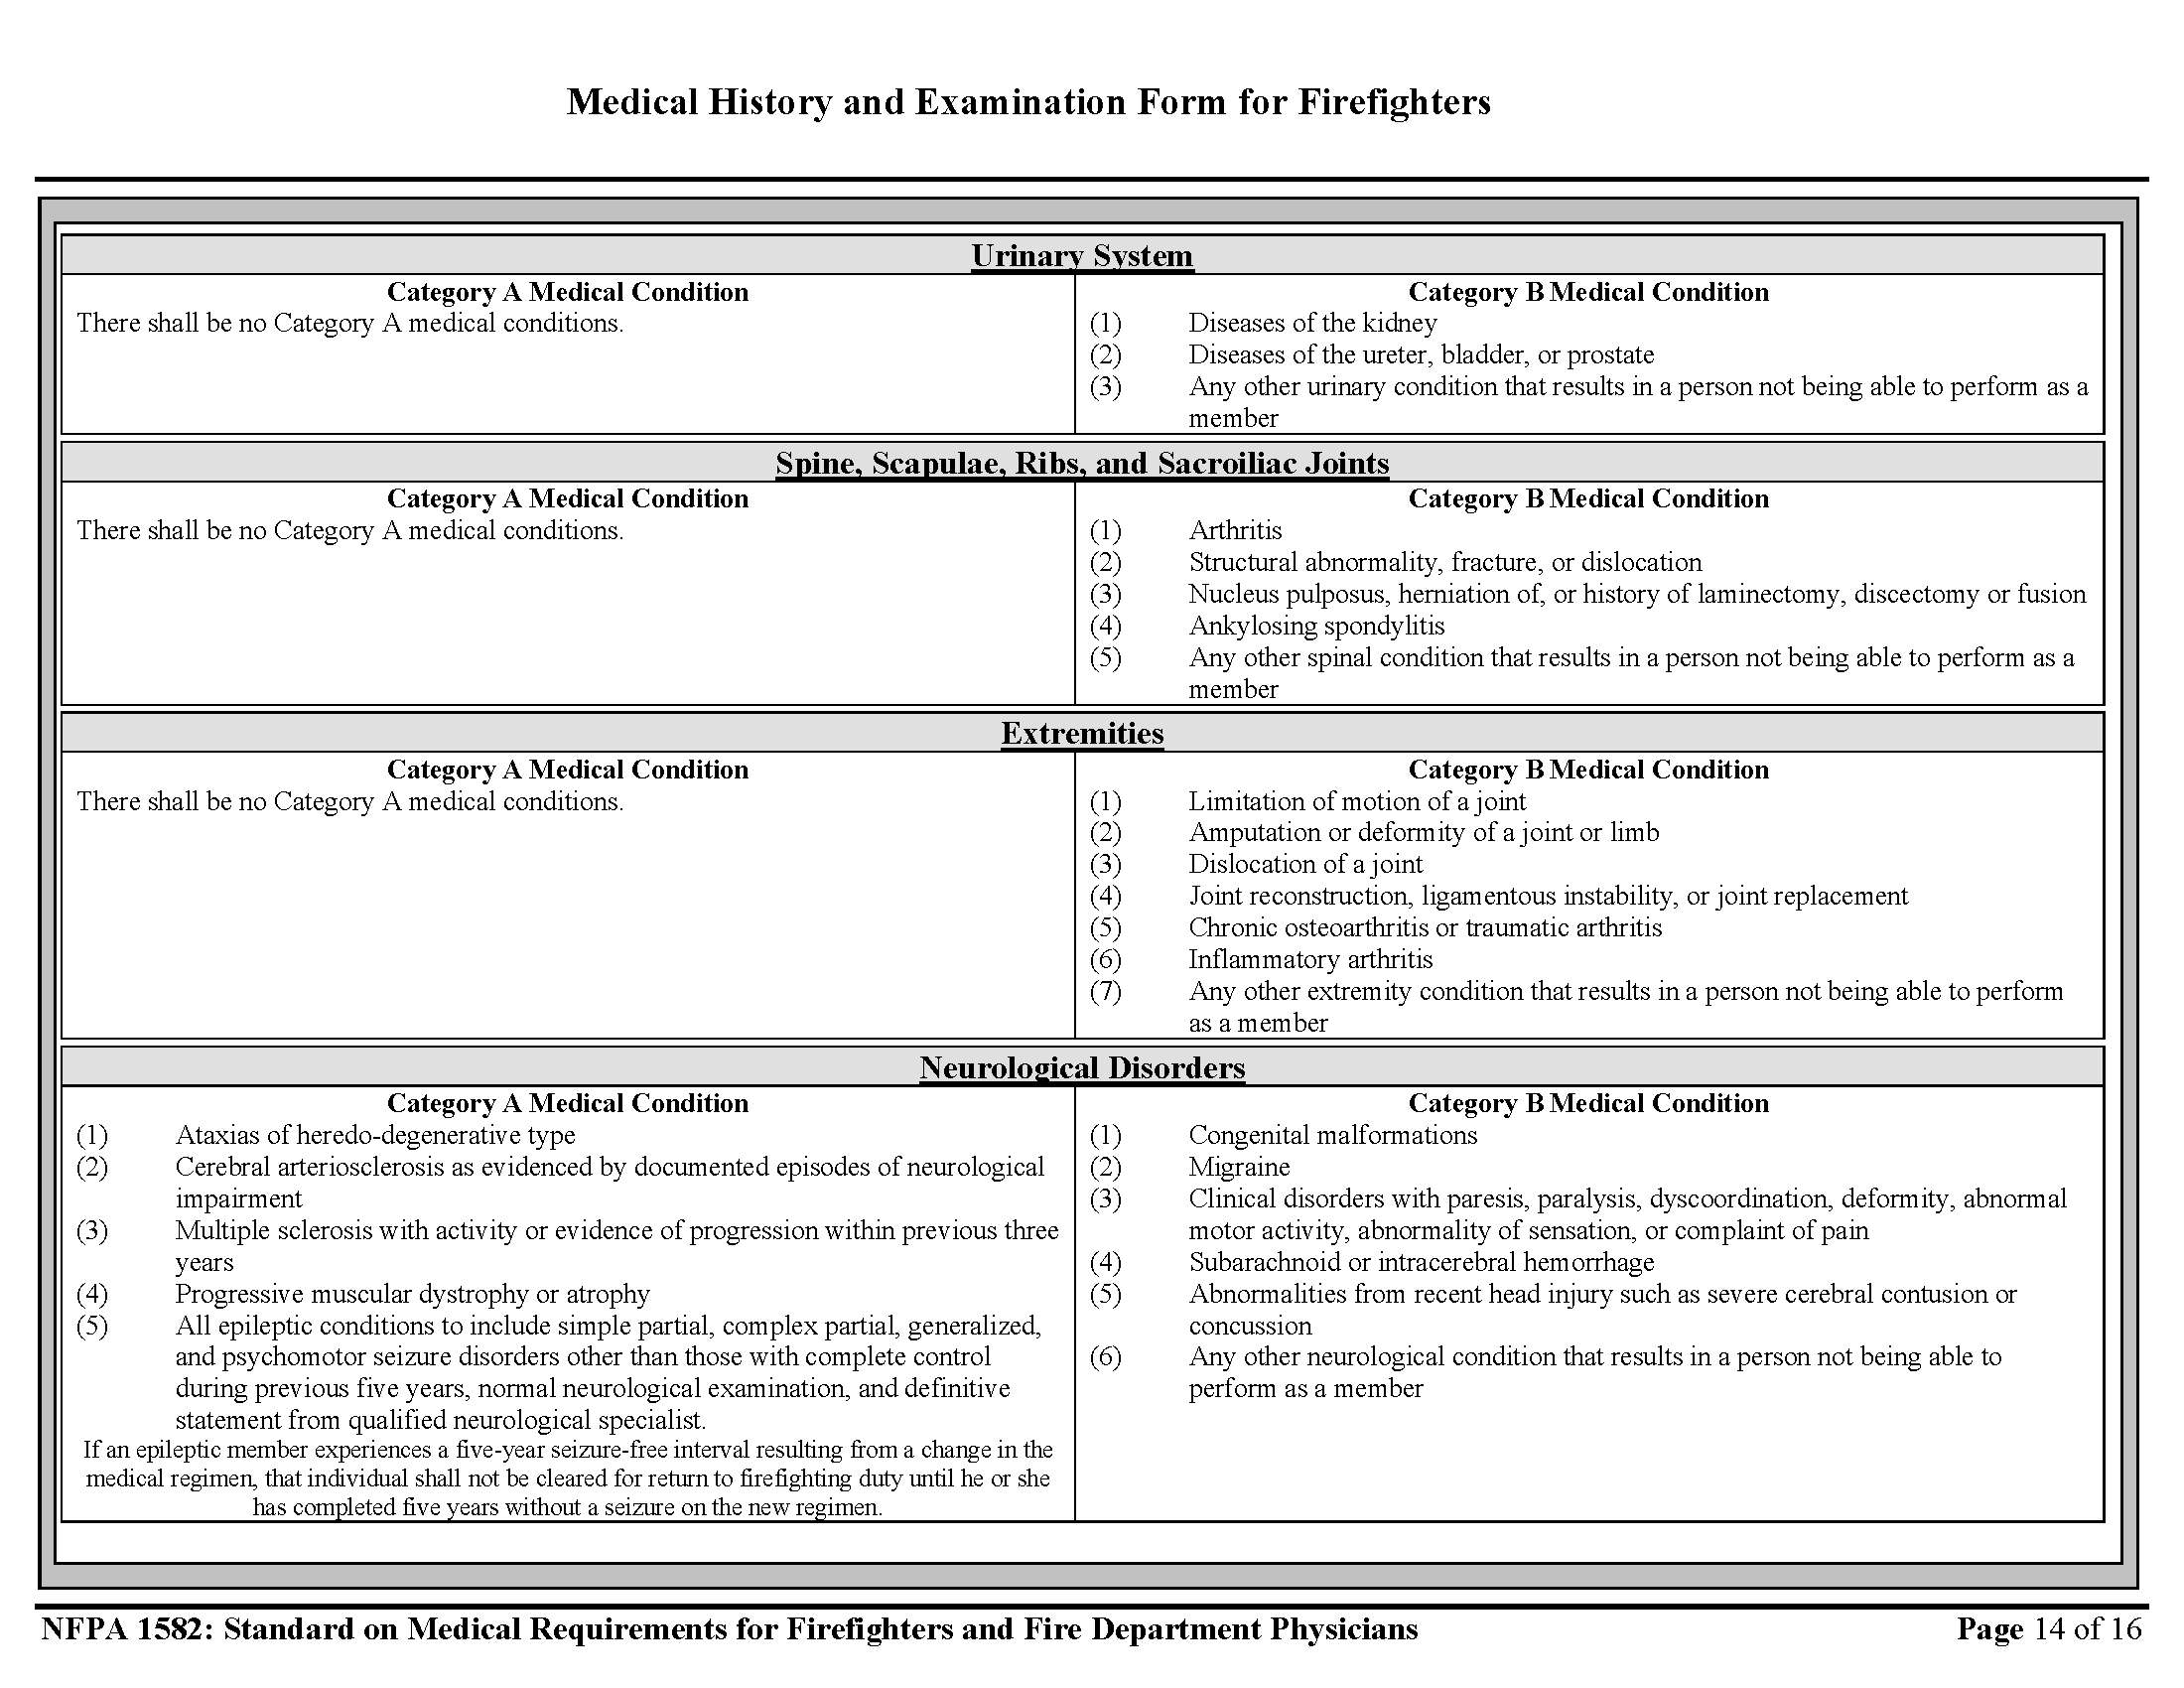 NFPA FORM 1582 FIREFIGHTER PHYSICAL Brown Clermont Adult Career 